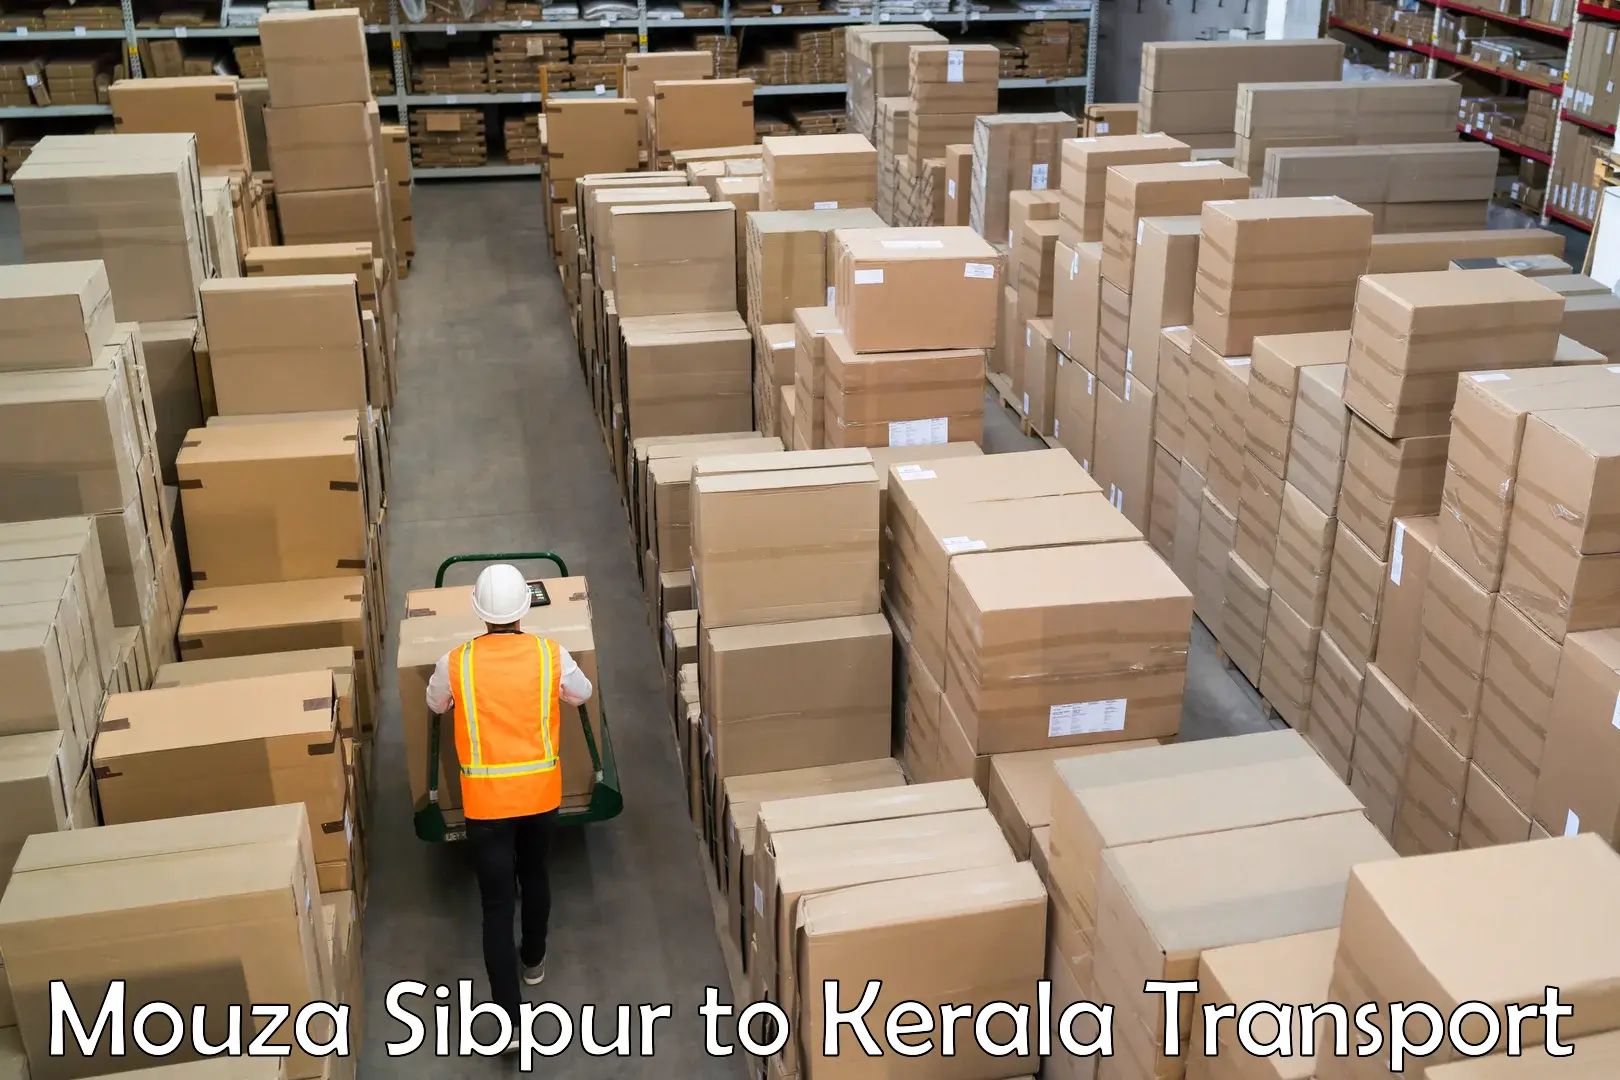 Transport shared services in Mouza Sibpur to Adur Kla